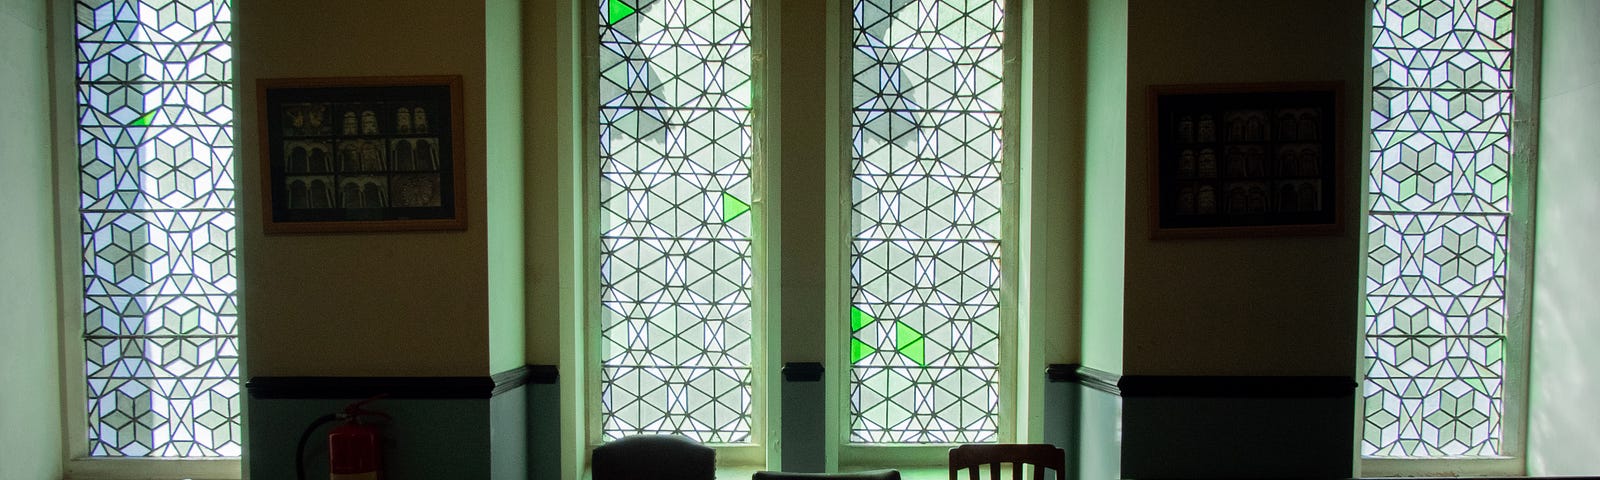 Three old chairs sit in front of a stained glass window